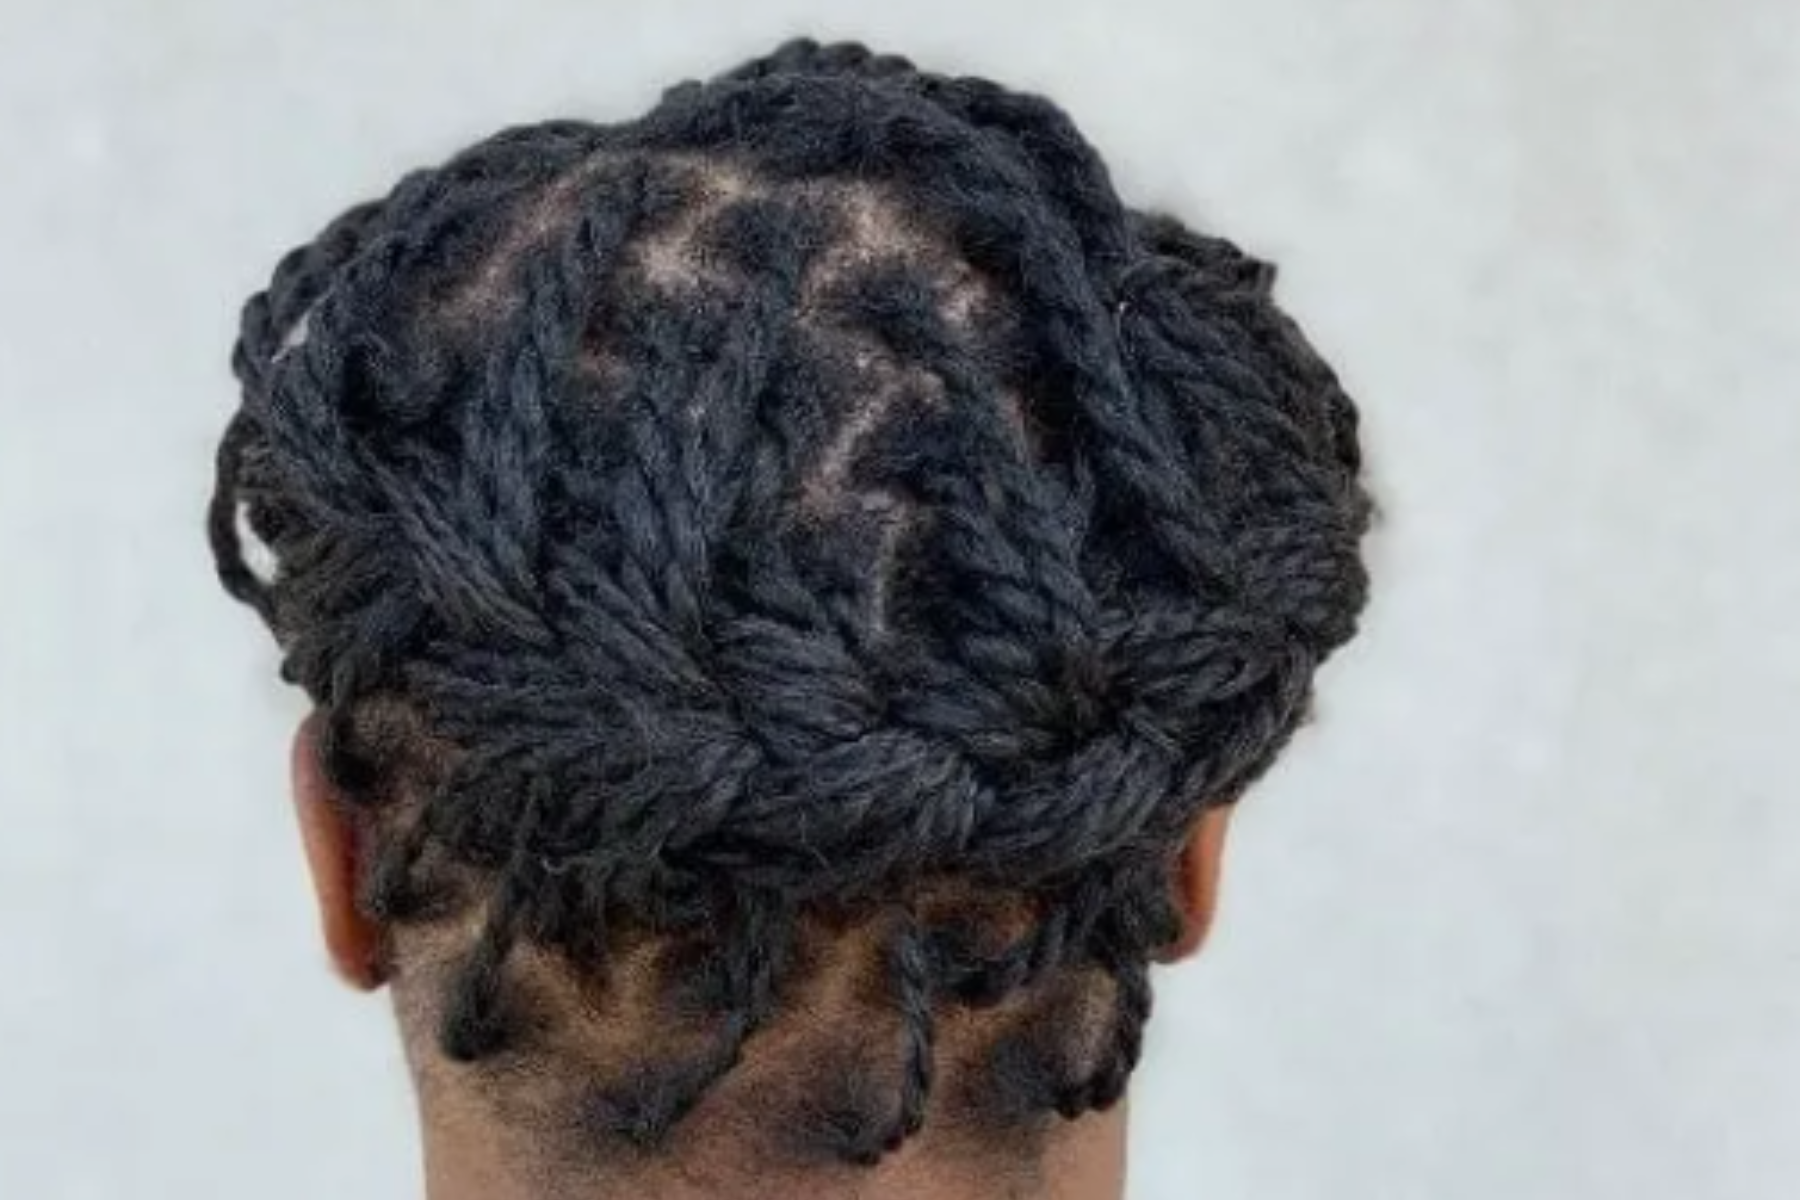 Twist Hairstyles For Men: Fresh Ideas For Next Year | Dreadlock hairstyles  for men, Twist hairstyles, Short natural hair styles